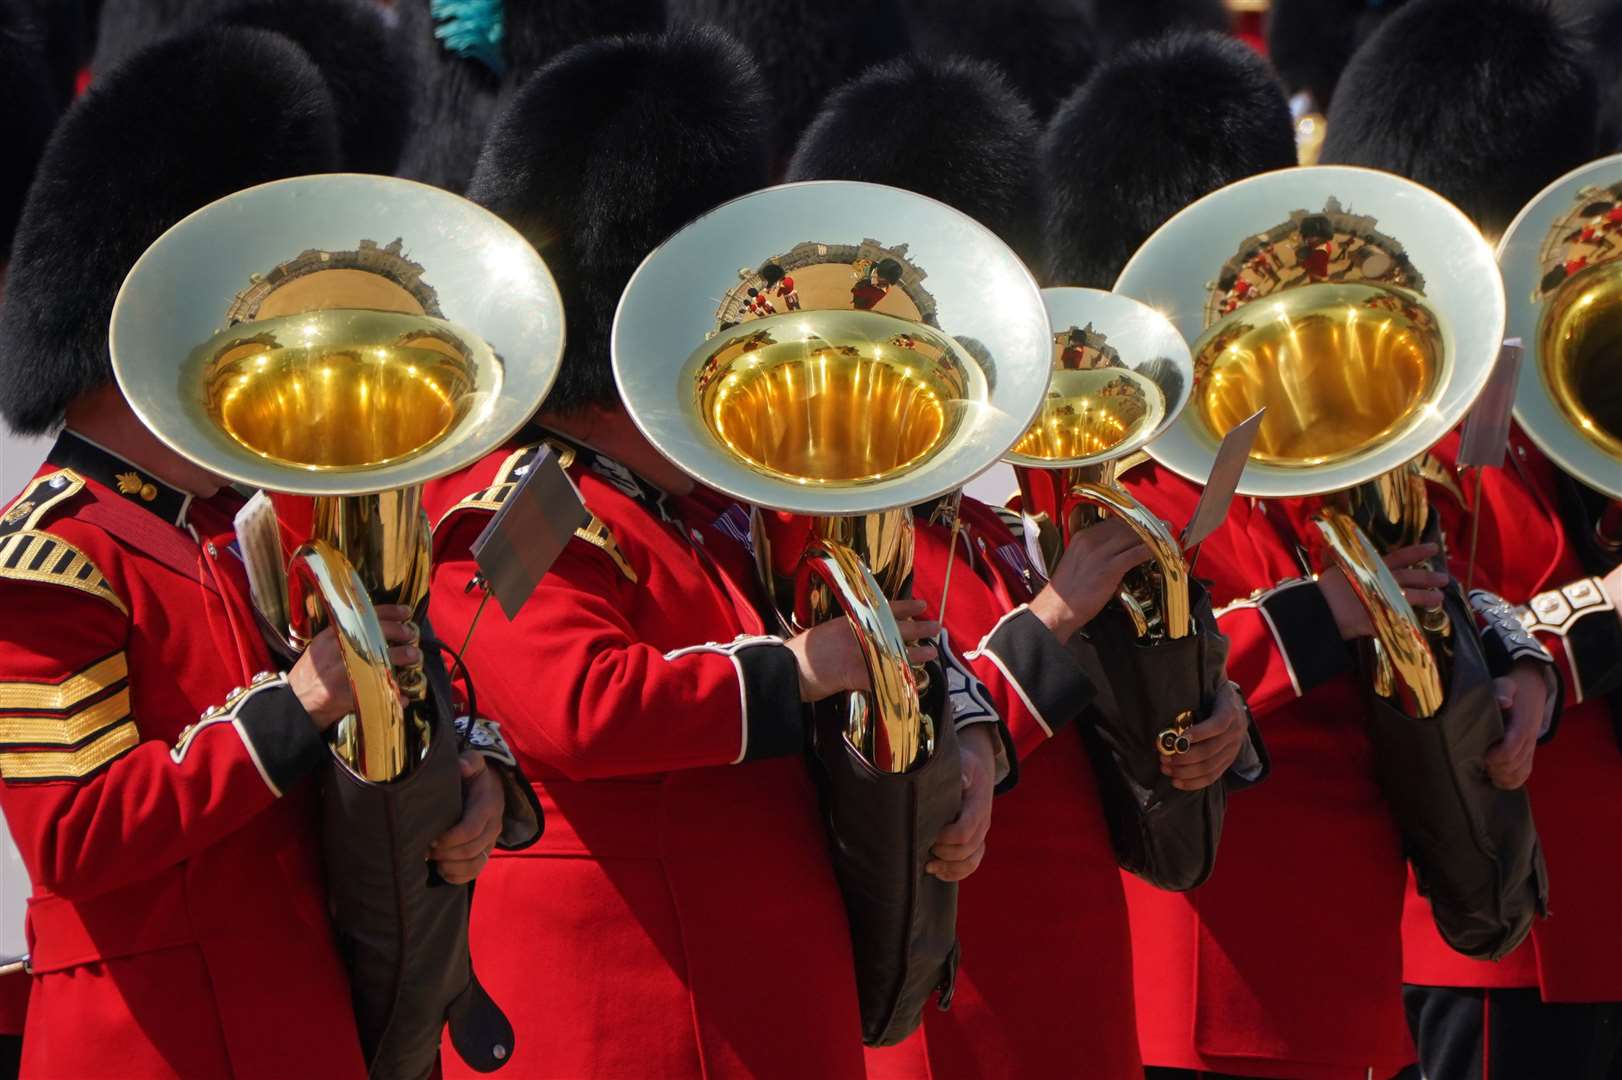 Sun gleams on the brass section of the military band (Jonathan Brady/PA)